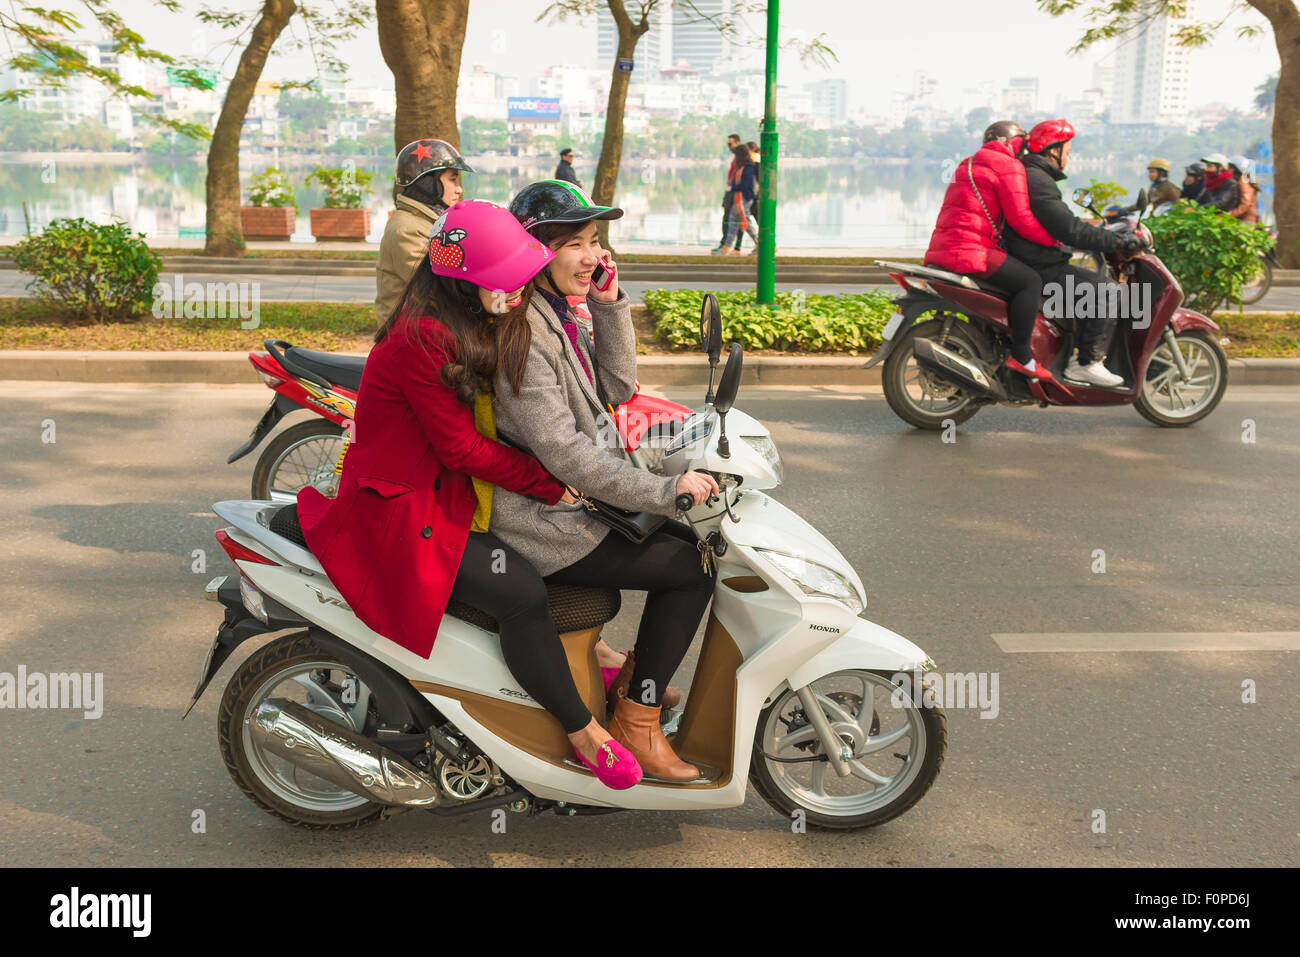 Female friends friendship, view of two young women riding a motorbike together on West Lake Causeway in Hanoi, Vietnam Stock Photo